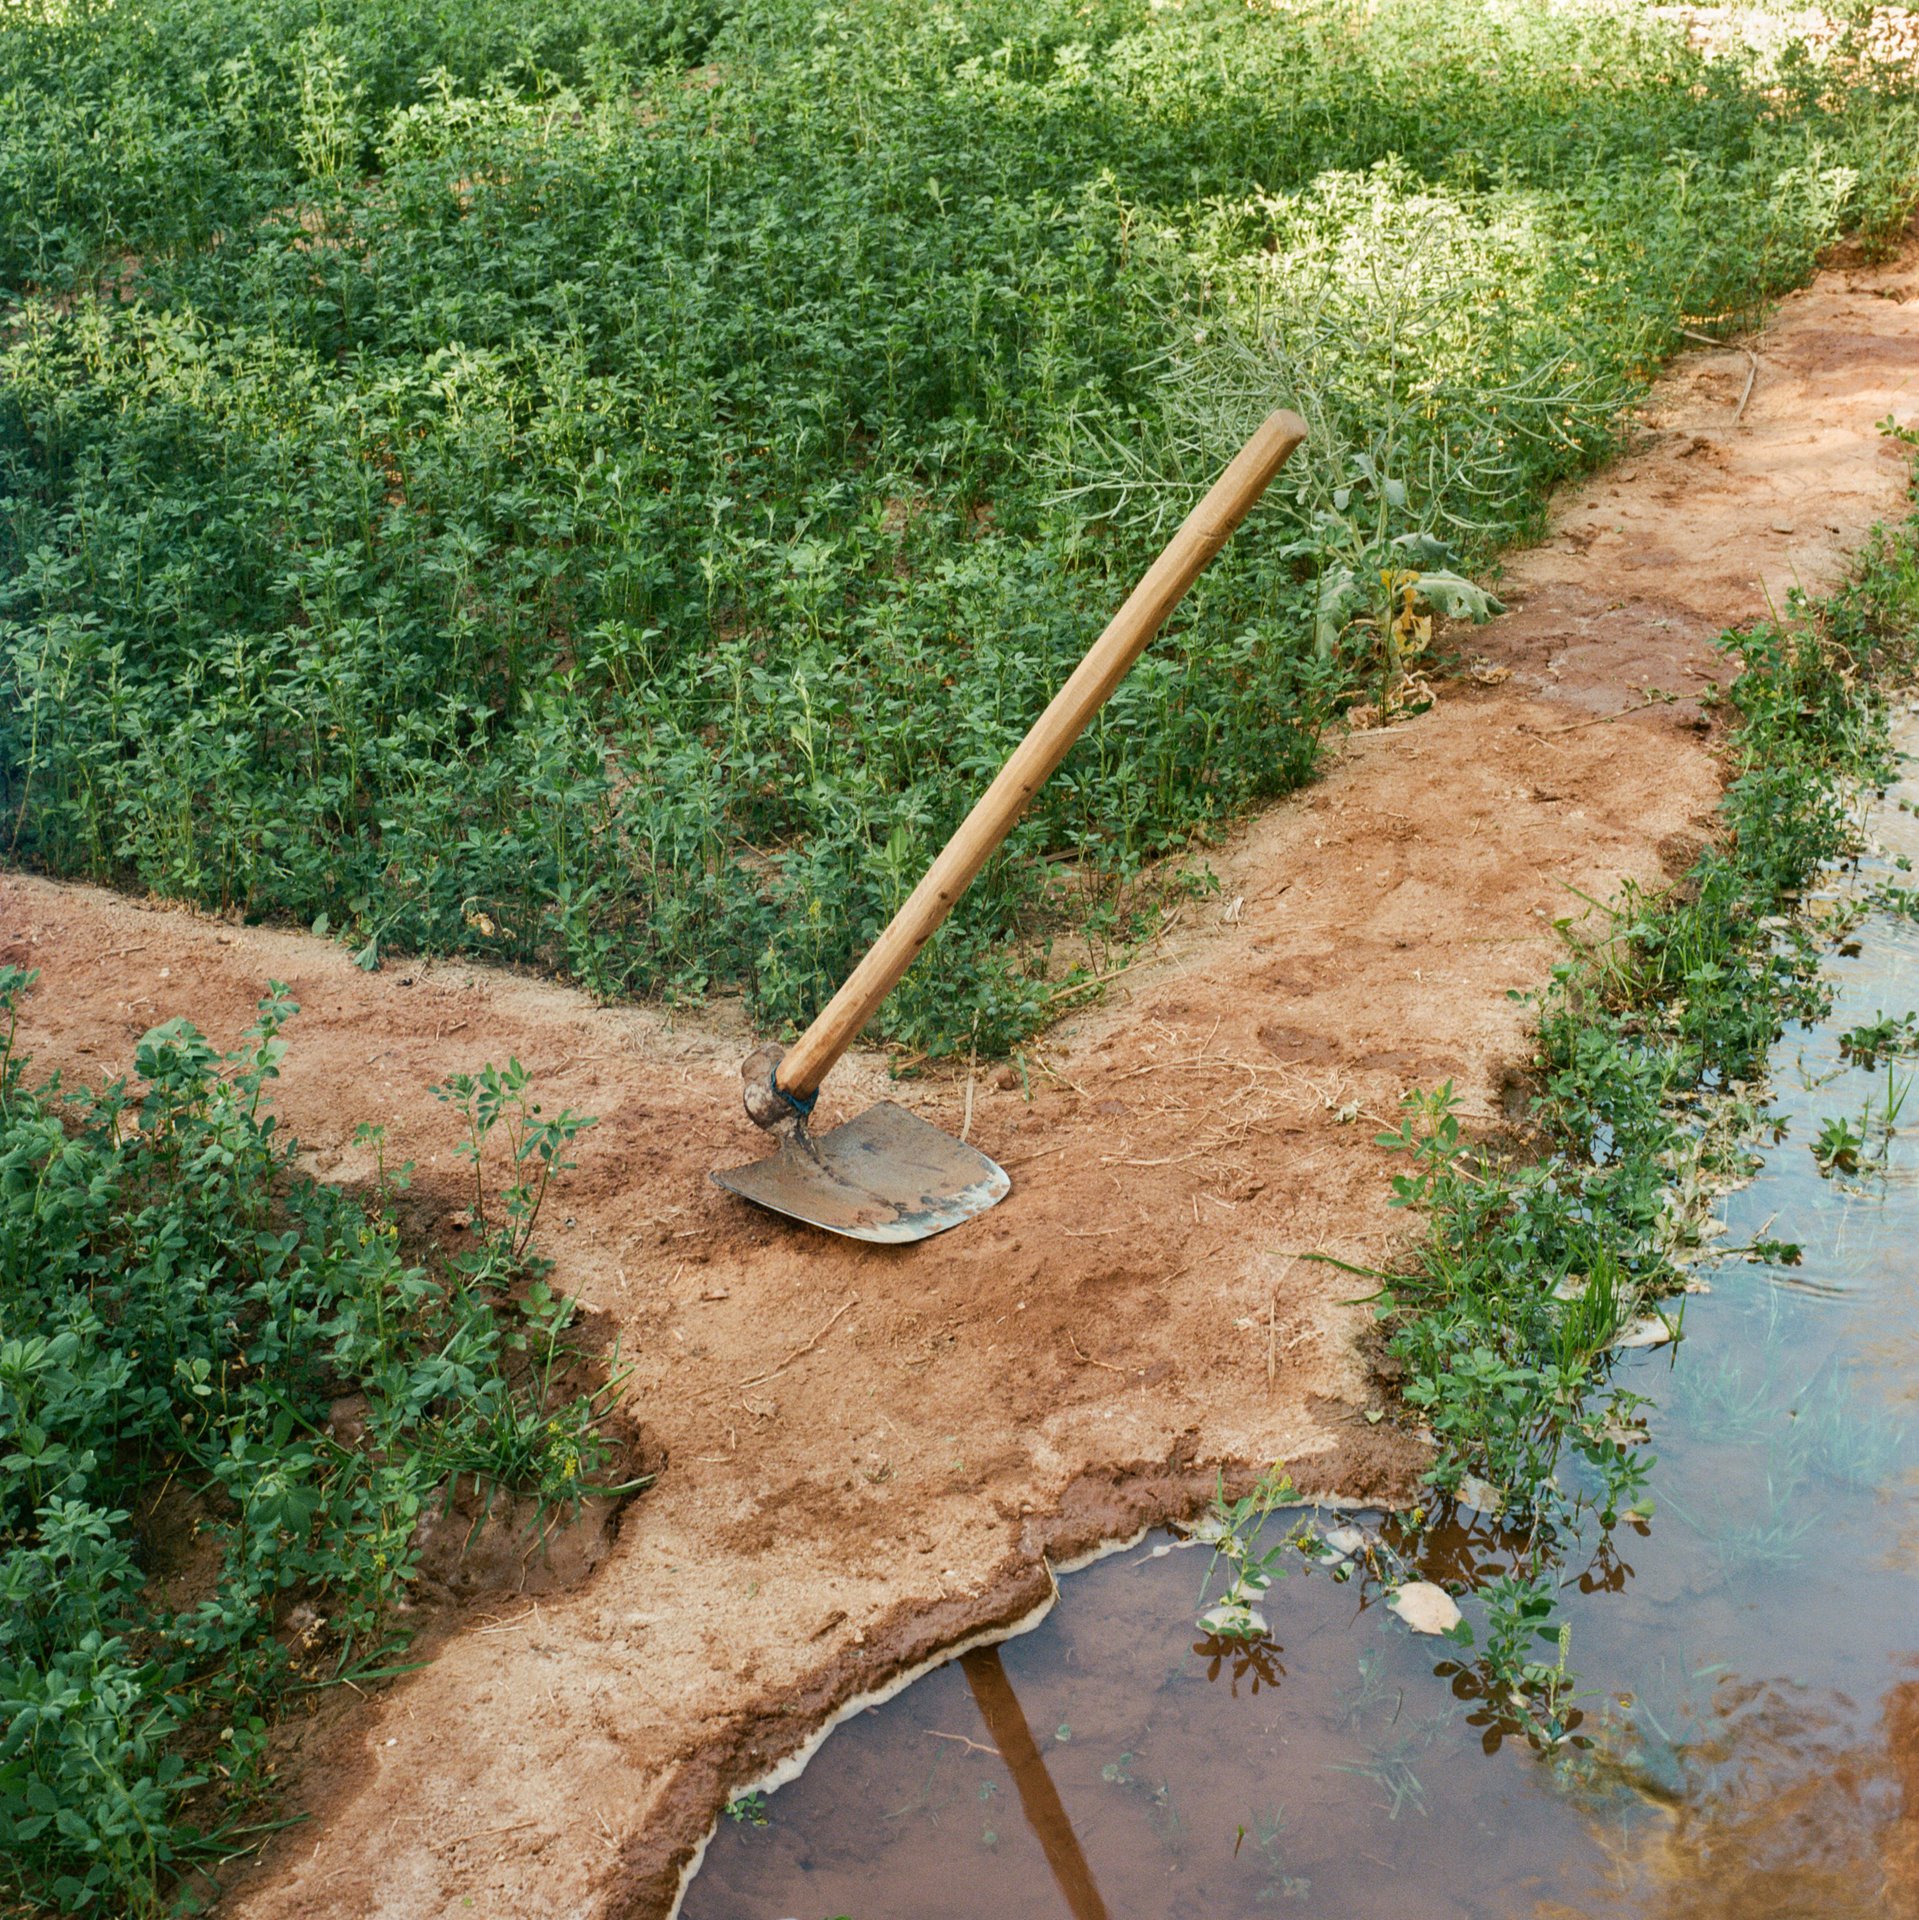 A hoe stands beside an irrigation canal in a farmer&rsquo;s field in Zagora, by the Oued Draa river in eastern Morocco.